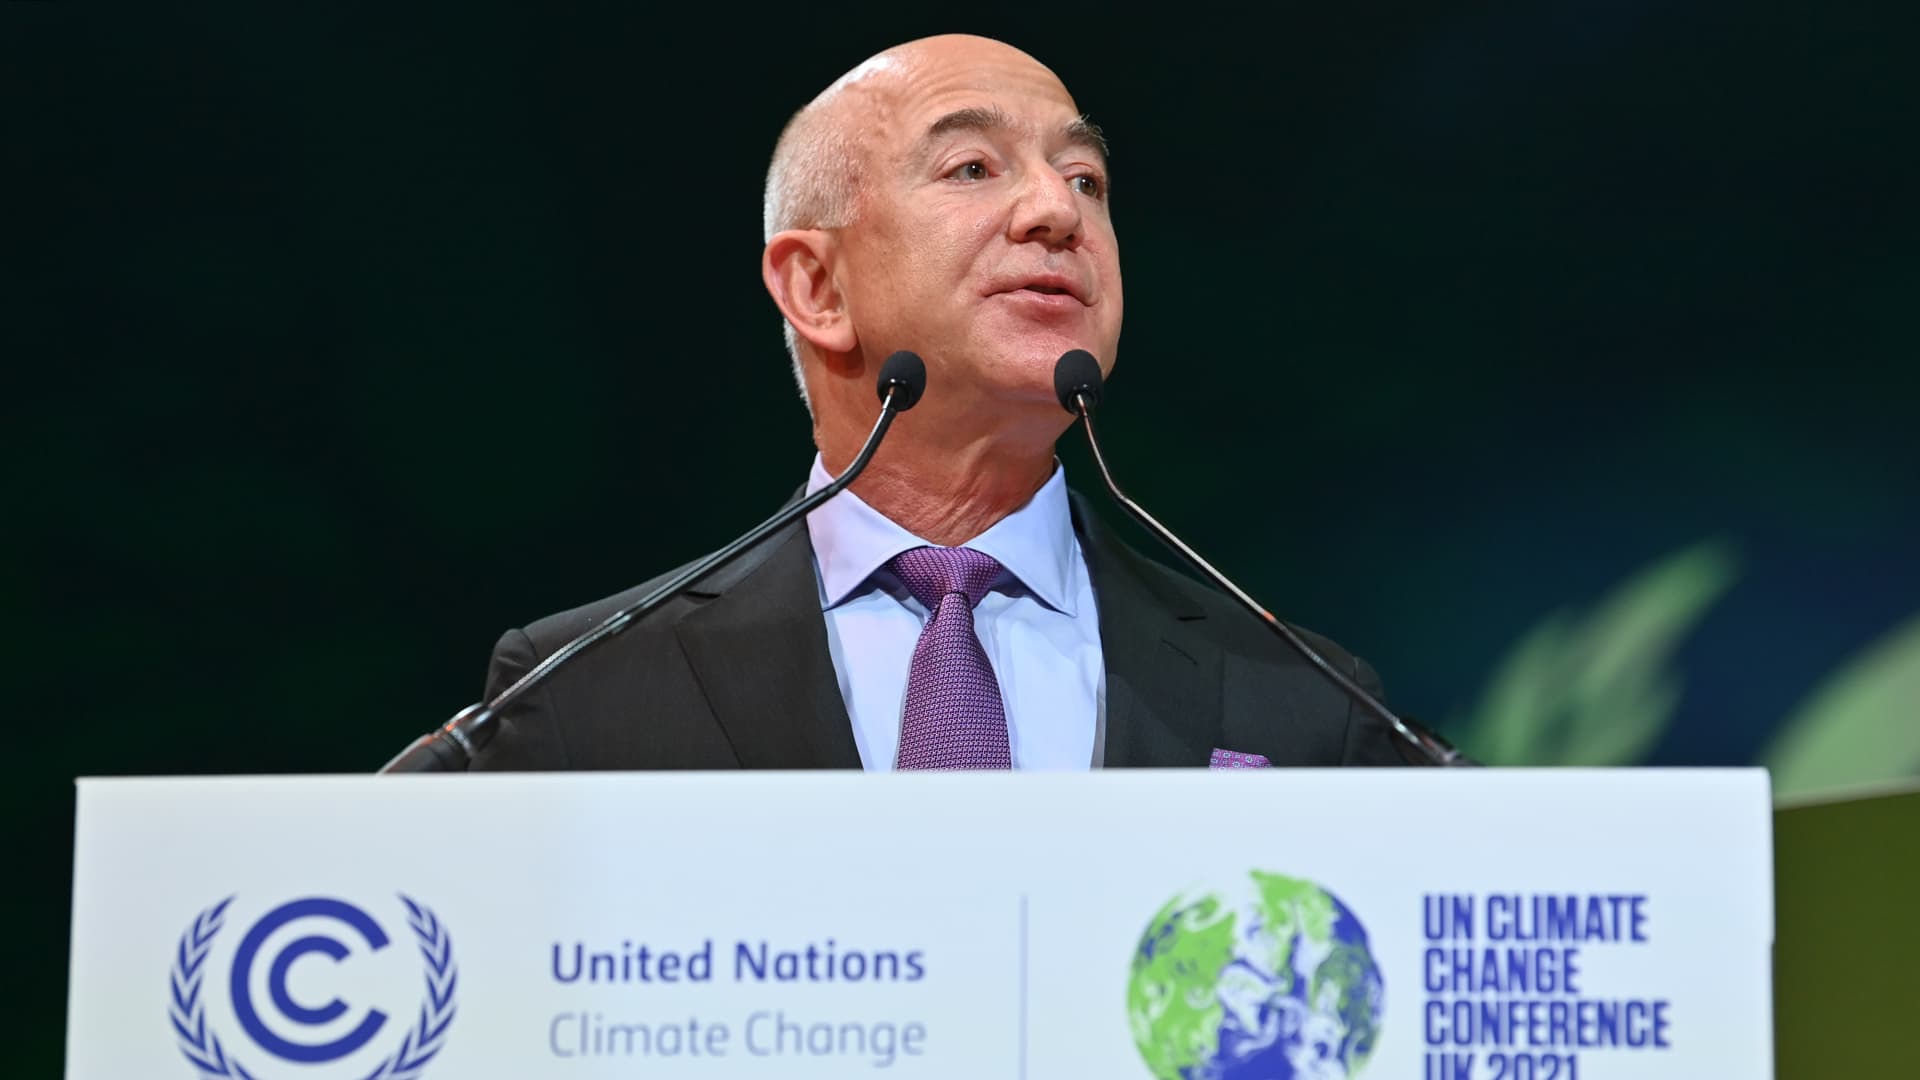 Jeff Bezos speaks at the COP26 climate summit in Glasgow, United Kingdom on November 2, 2021.